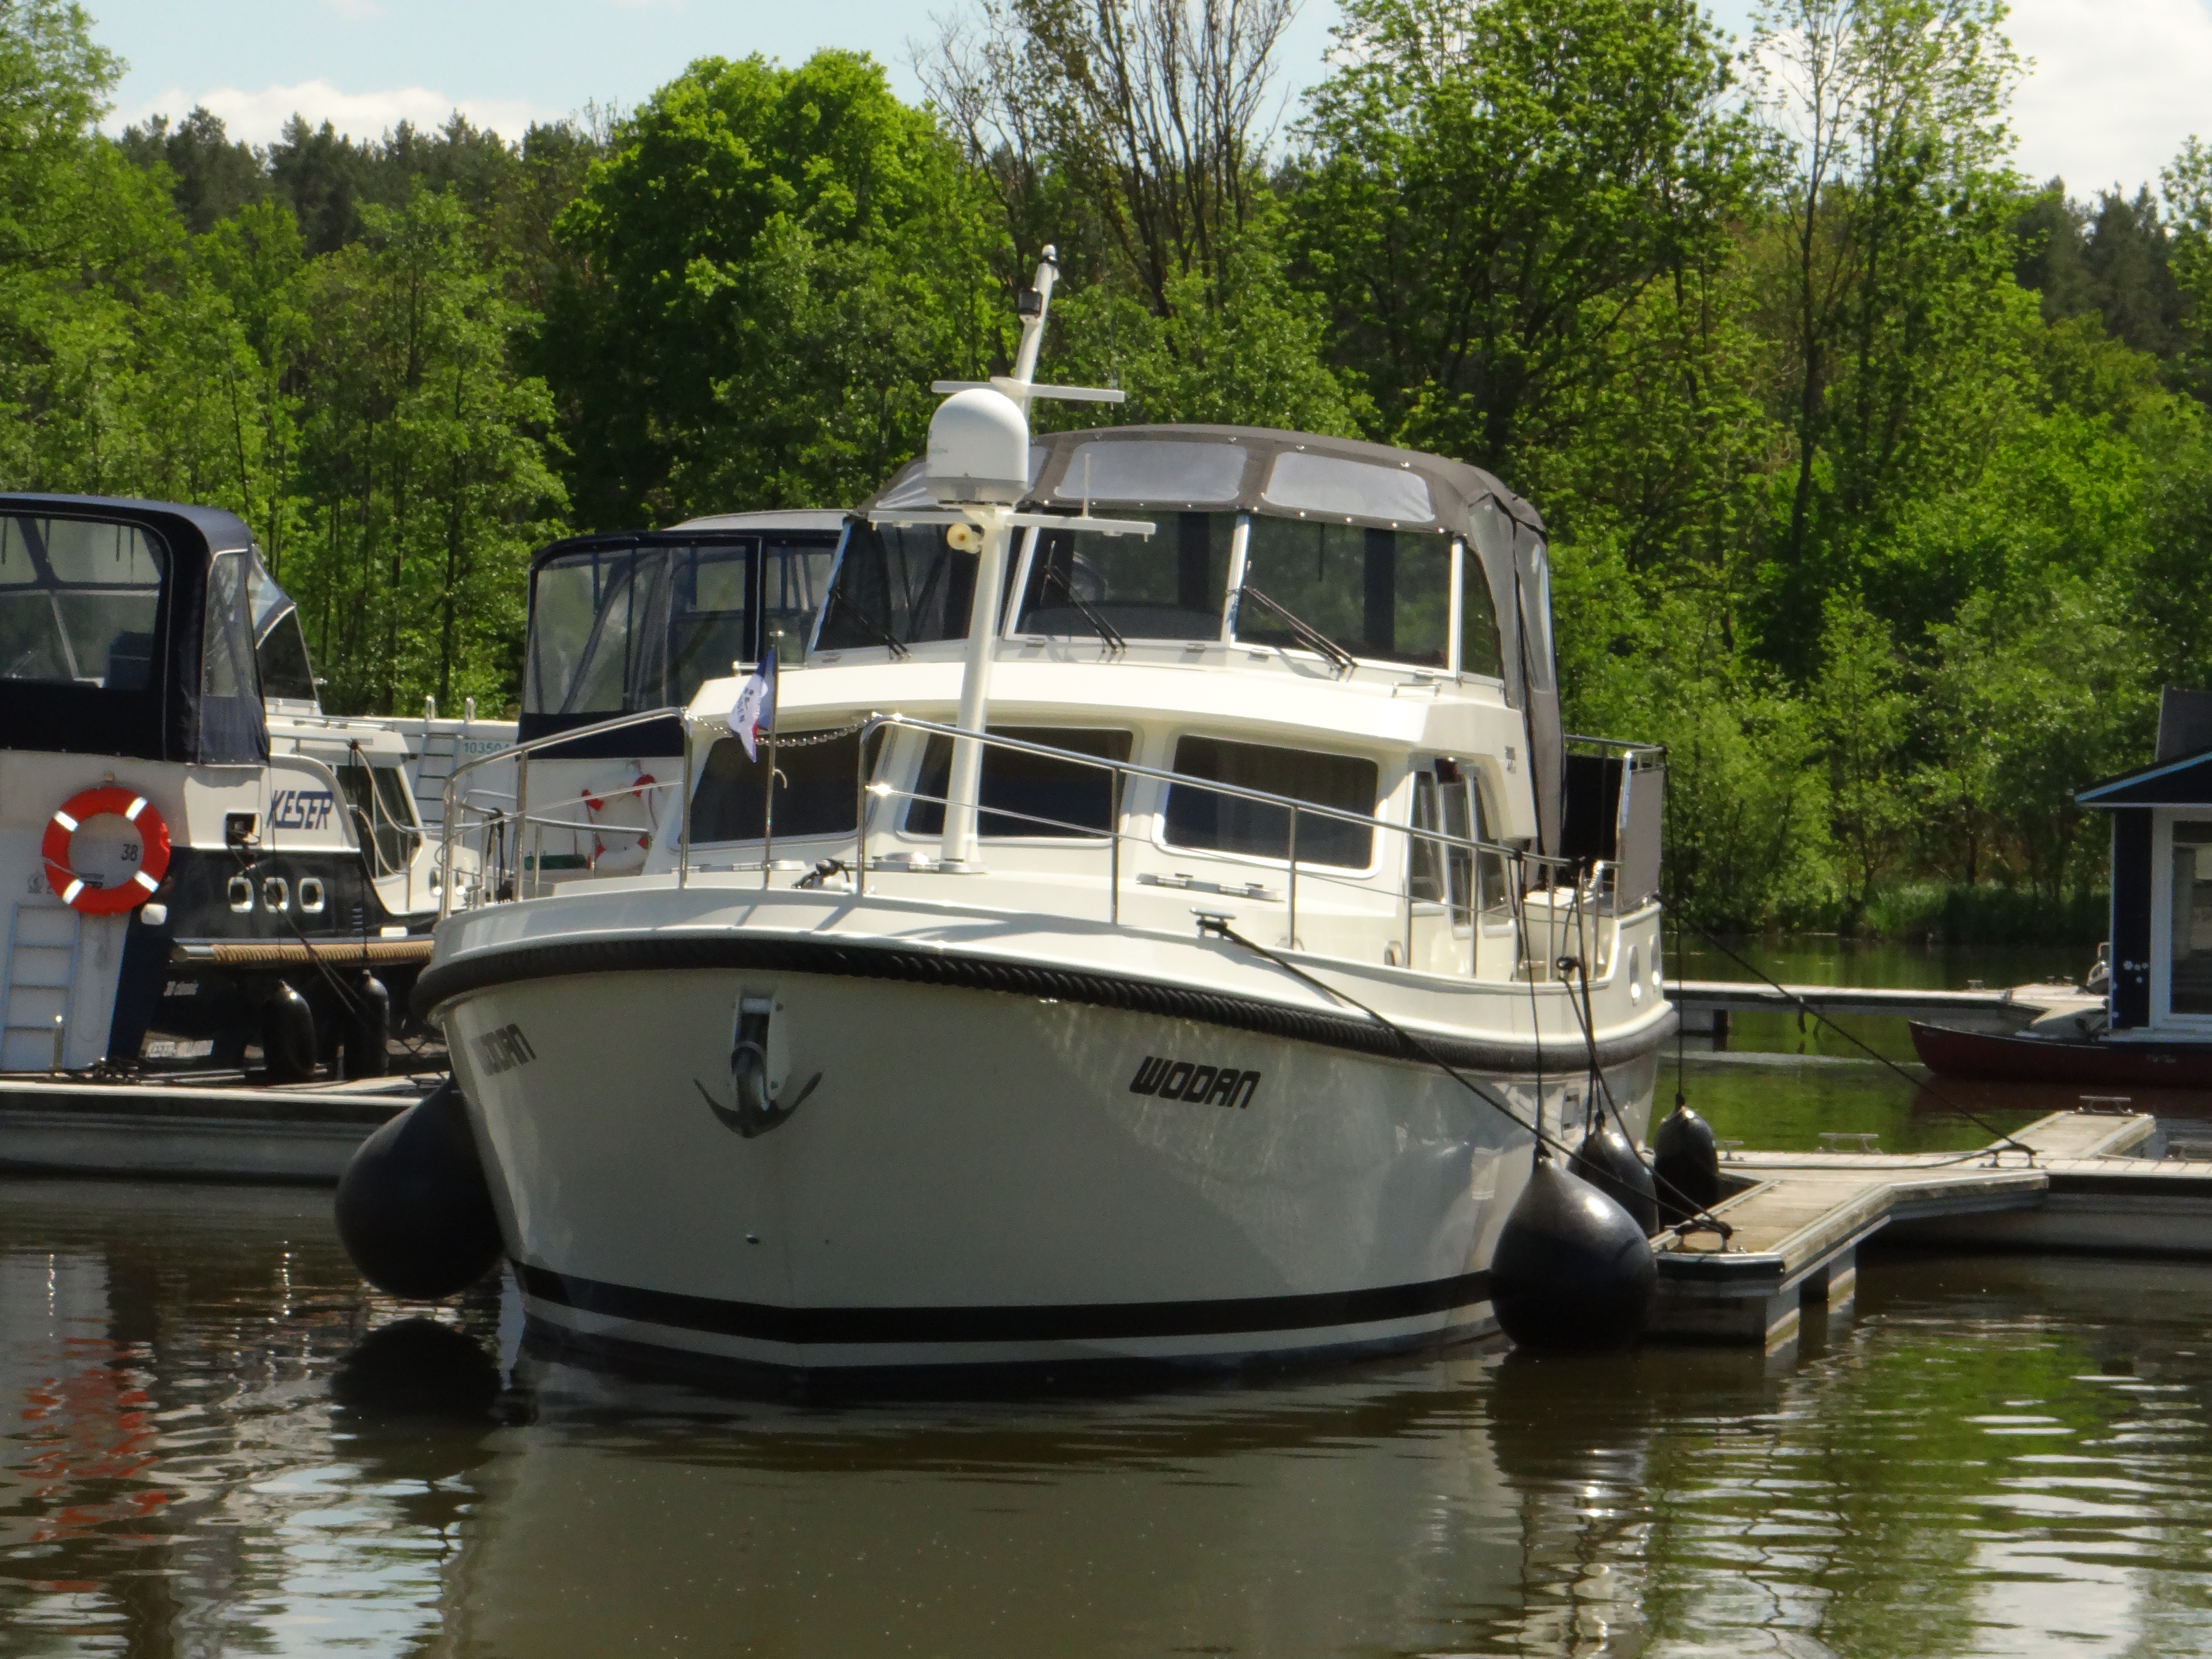 Linssen Grand Sturdy 40.9 AC - Yacht Charter Germany & Boat hire in Germany Mirow Jachthafen Mirow 5